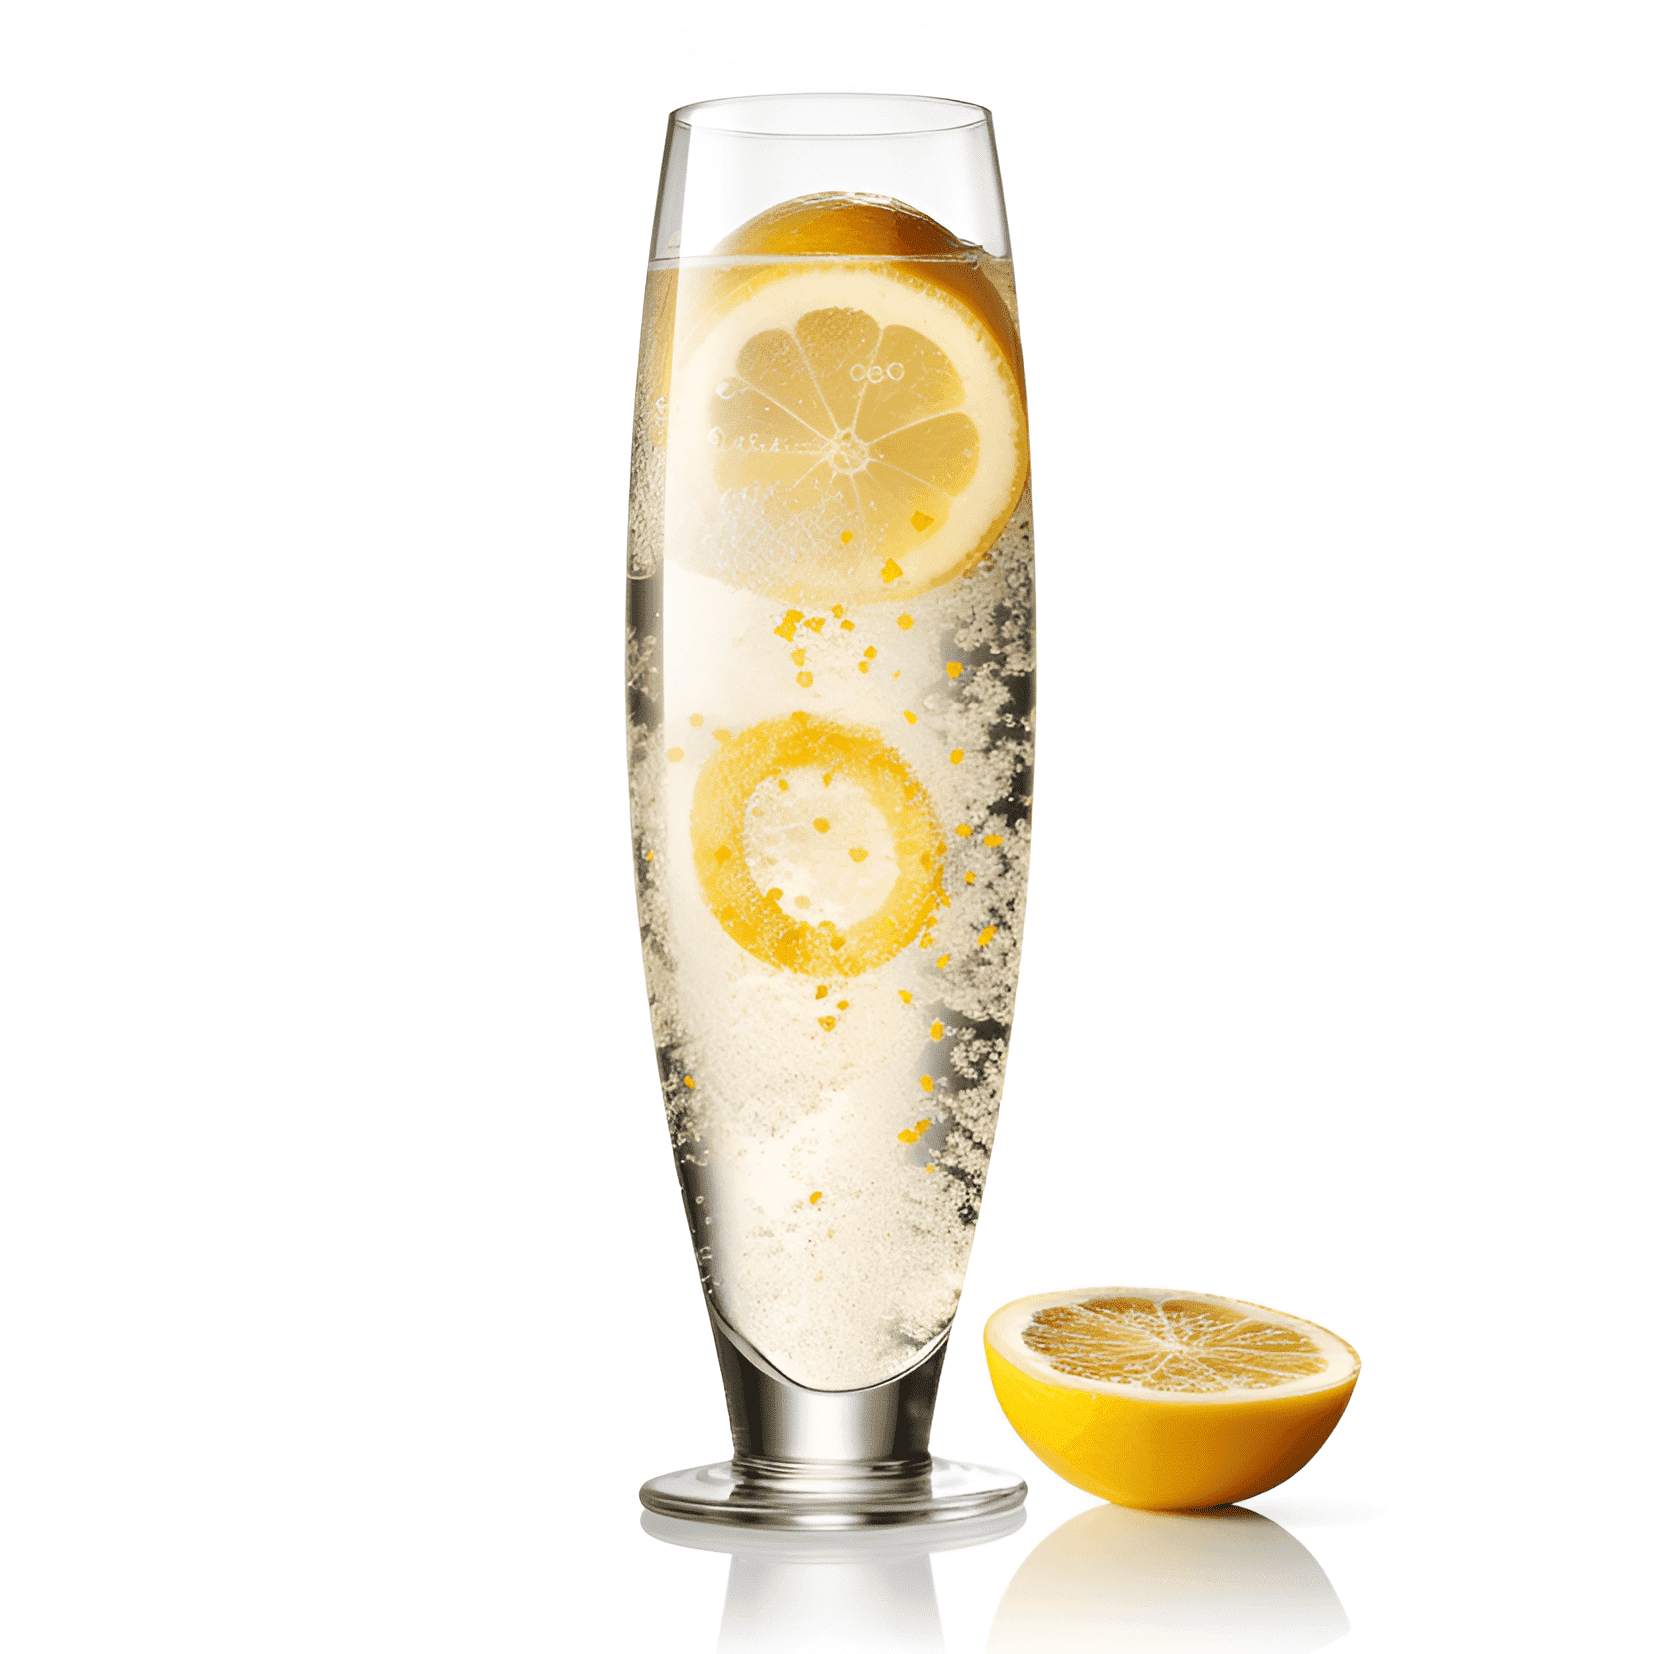 Fred Collins Fizz Cocktail Recipe - Fred Collins Fizz is a refreshing, citrusy, and slightly sweet cocktail with a hint of tartness. The combination of lemon juice, orange juice, and simple syrup creates a balanced flavor profile, while the club soda adds a pleasant fizziness.